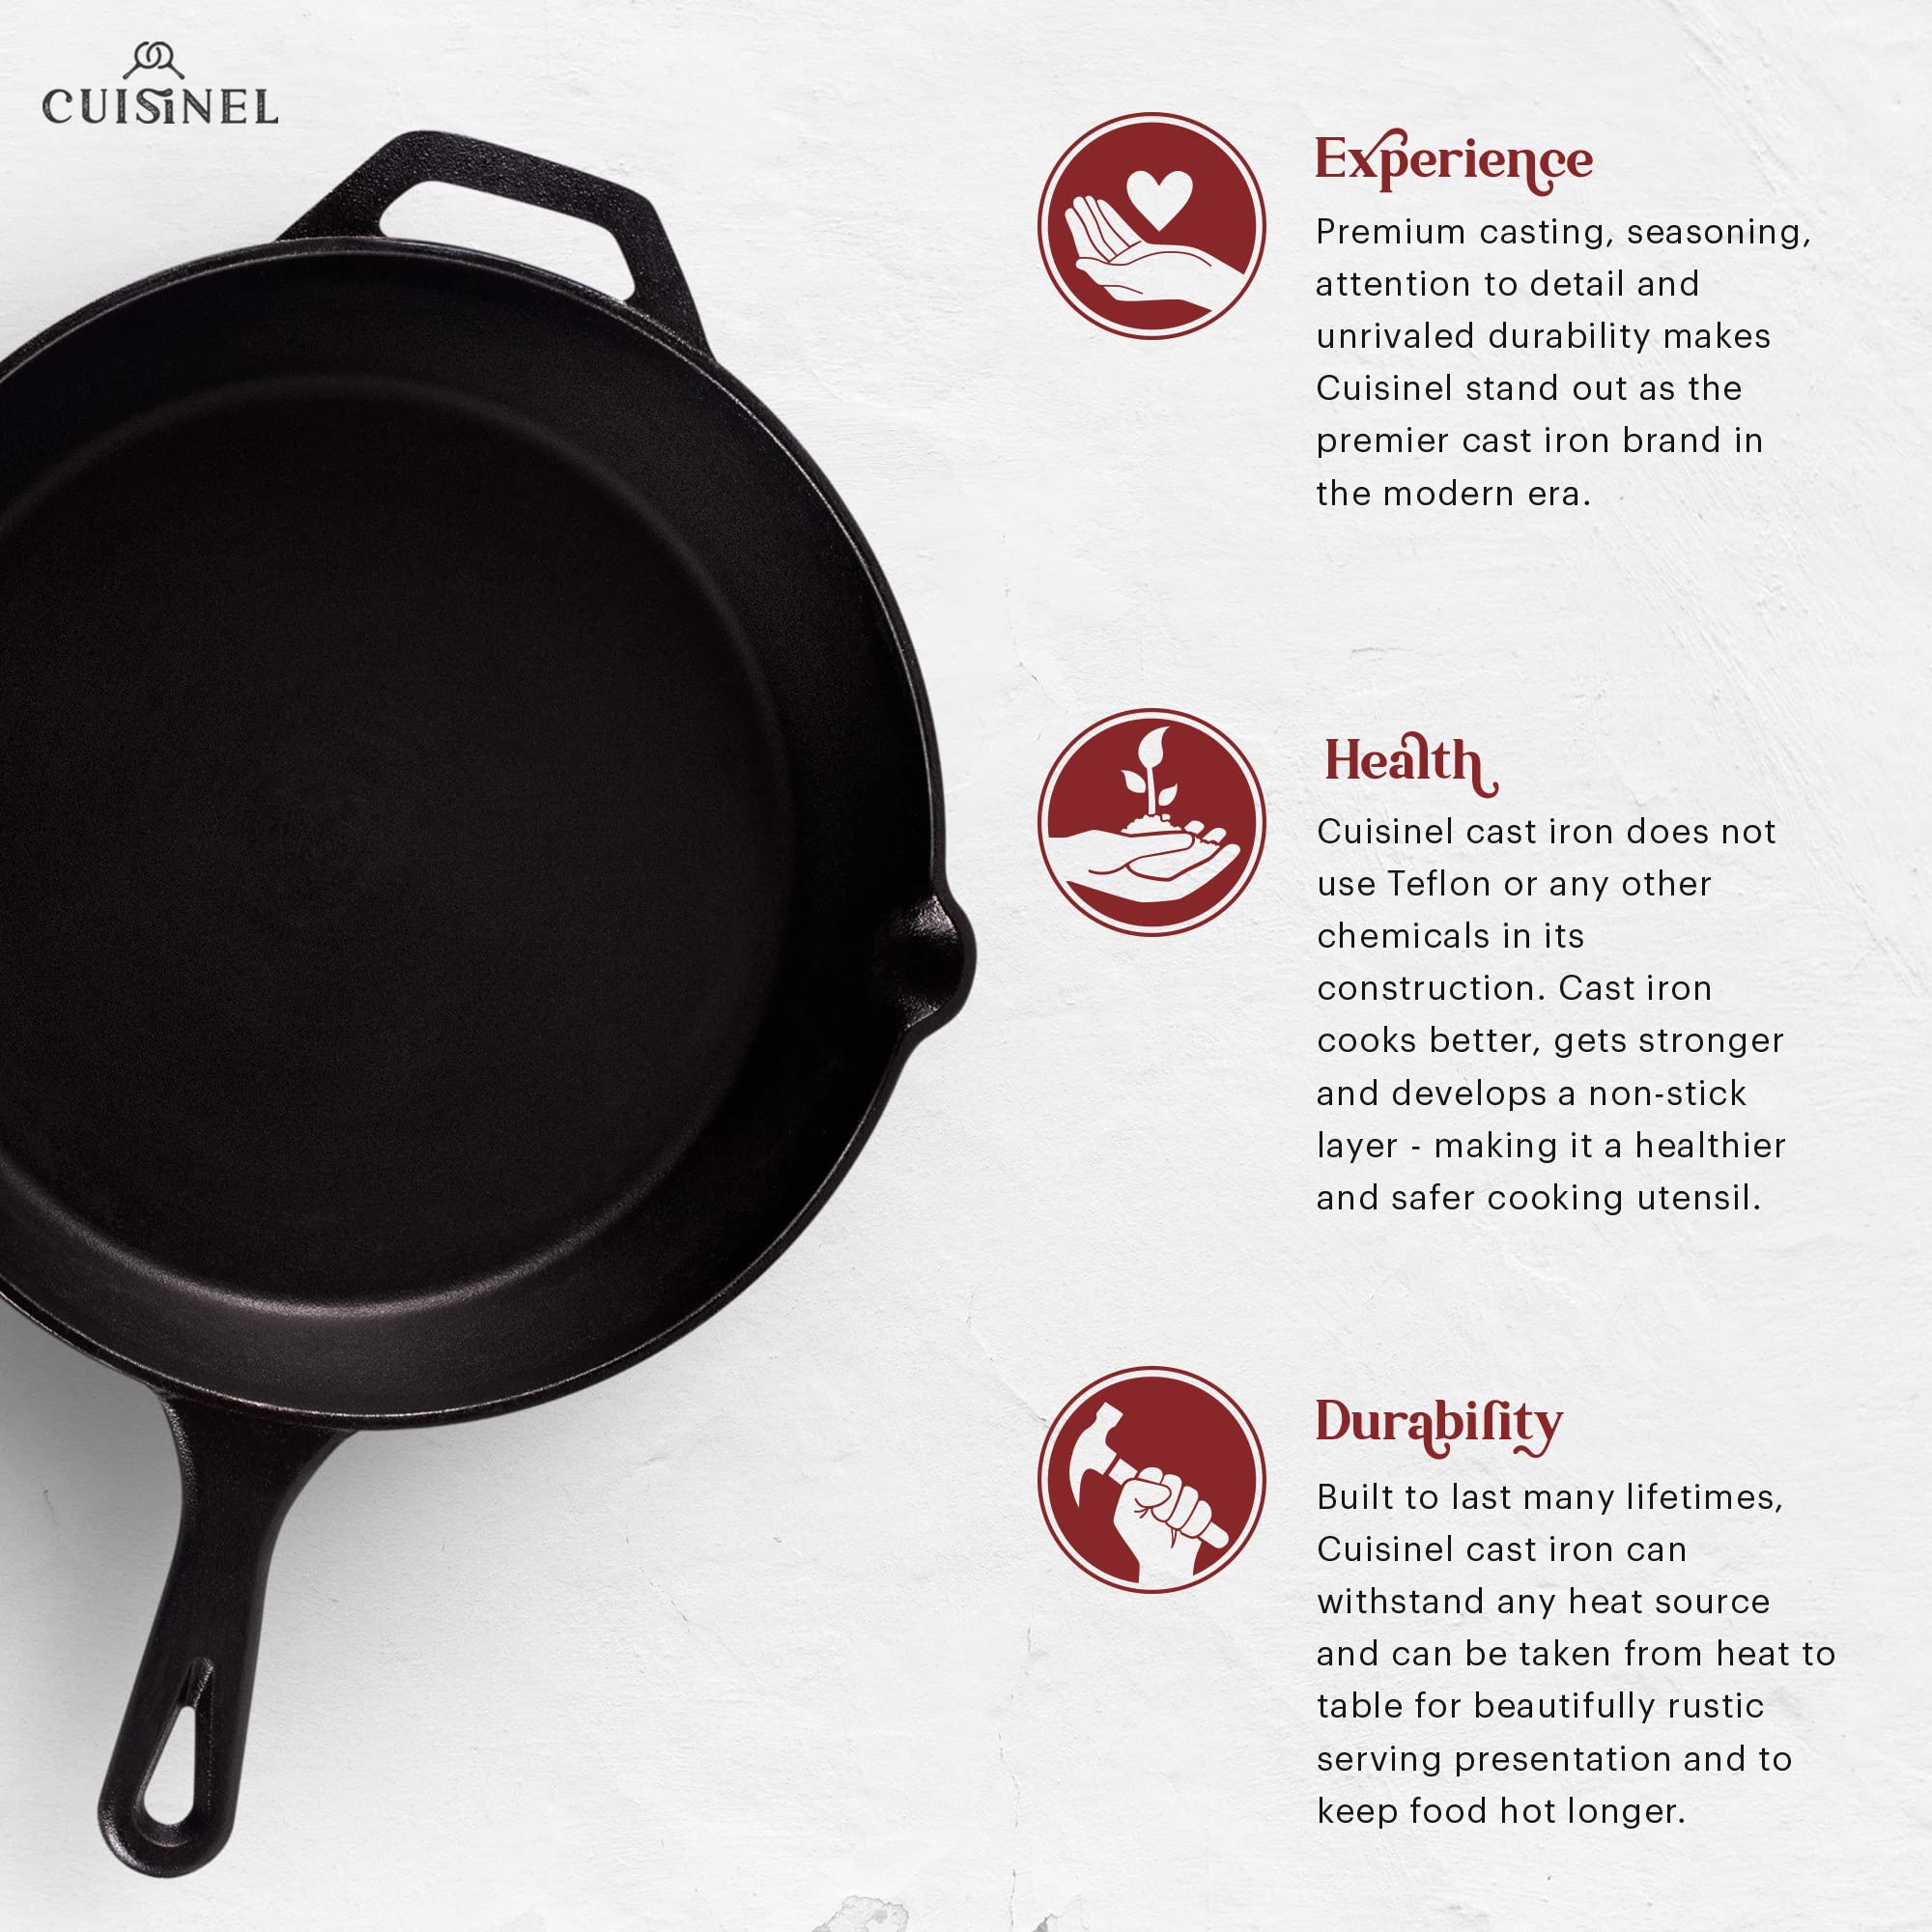 Cuisinel Cast Iron Skillet with Lid - 12"-Inch Frying Pan + Glass Cover + Silicone Handle Holder - Pre-Seasoned Oven Safe Cookware - Indoor/Outdoor Use - Grill, BBQ, Fire, Stovetop, Induction  - Good